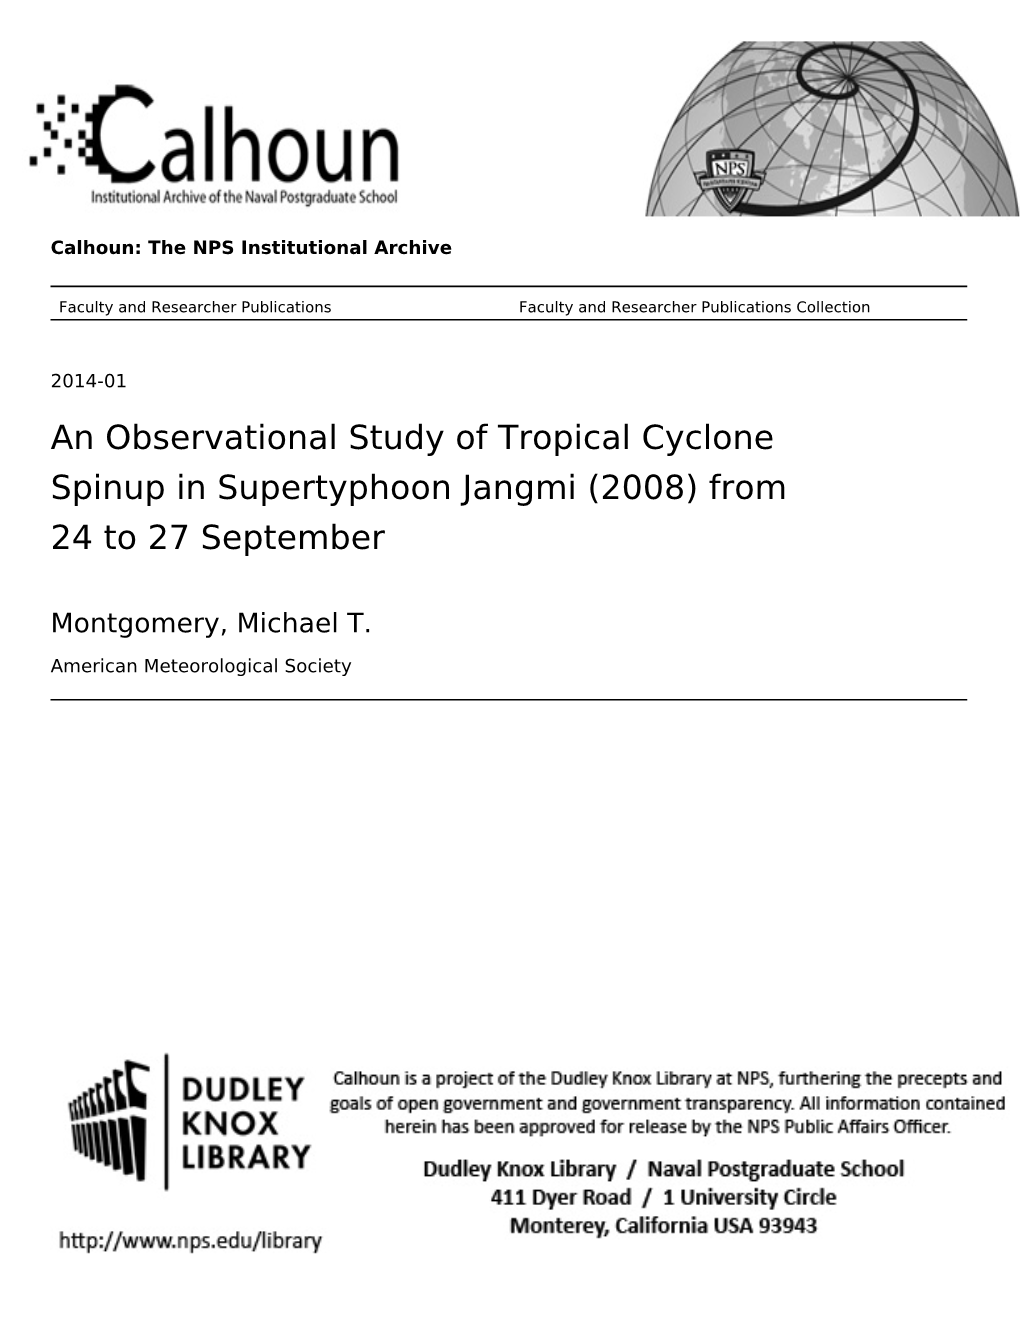 An Observational Study of Tropical Cyclone Spinup in Supertyphoon Jangmi (2008) from 24 to 27 September